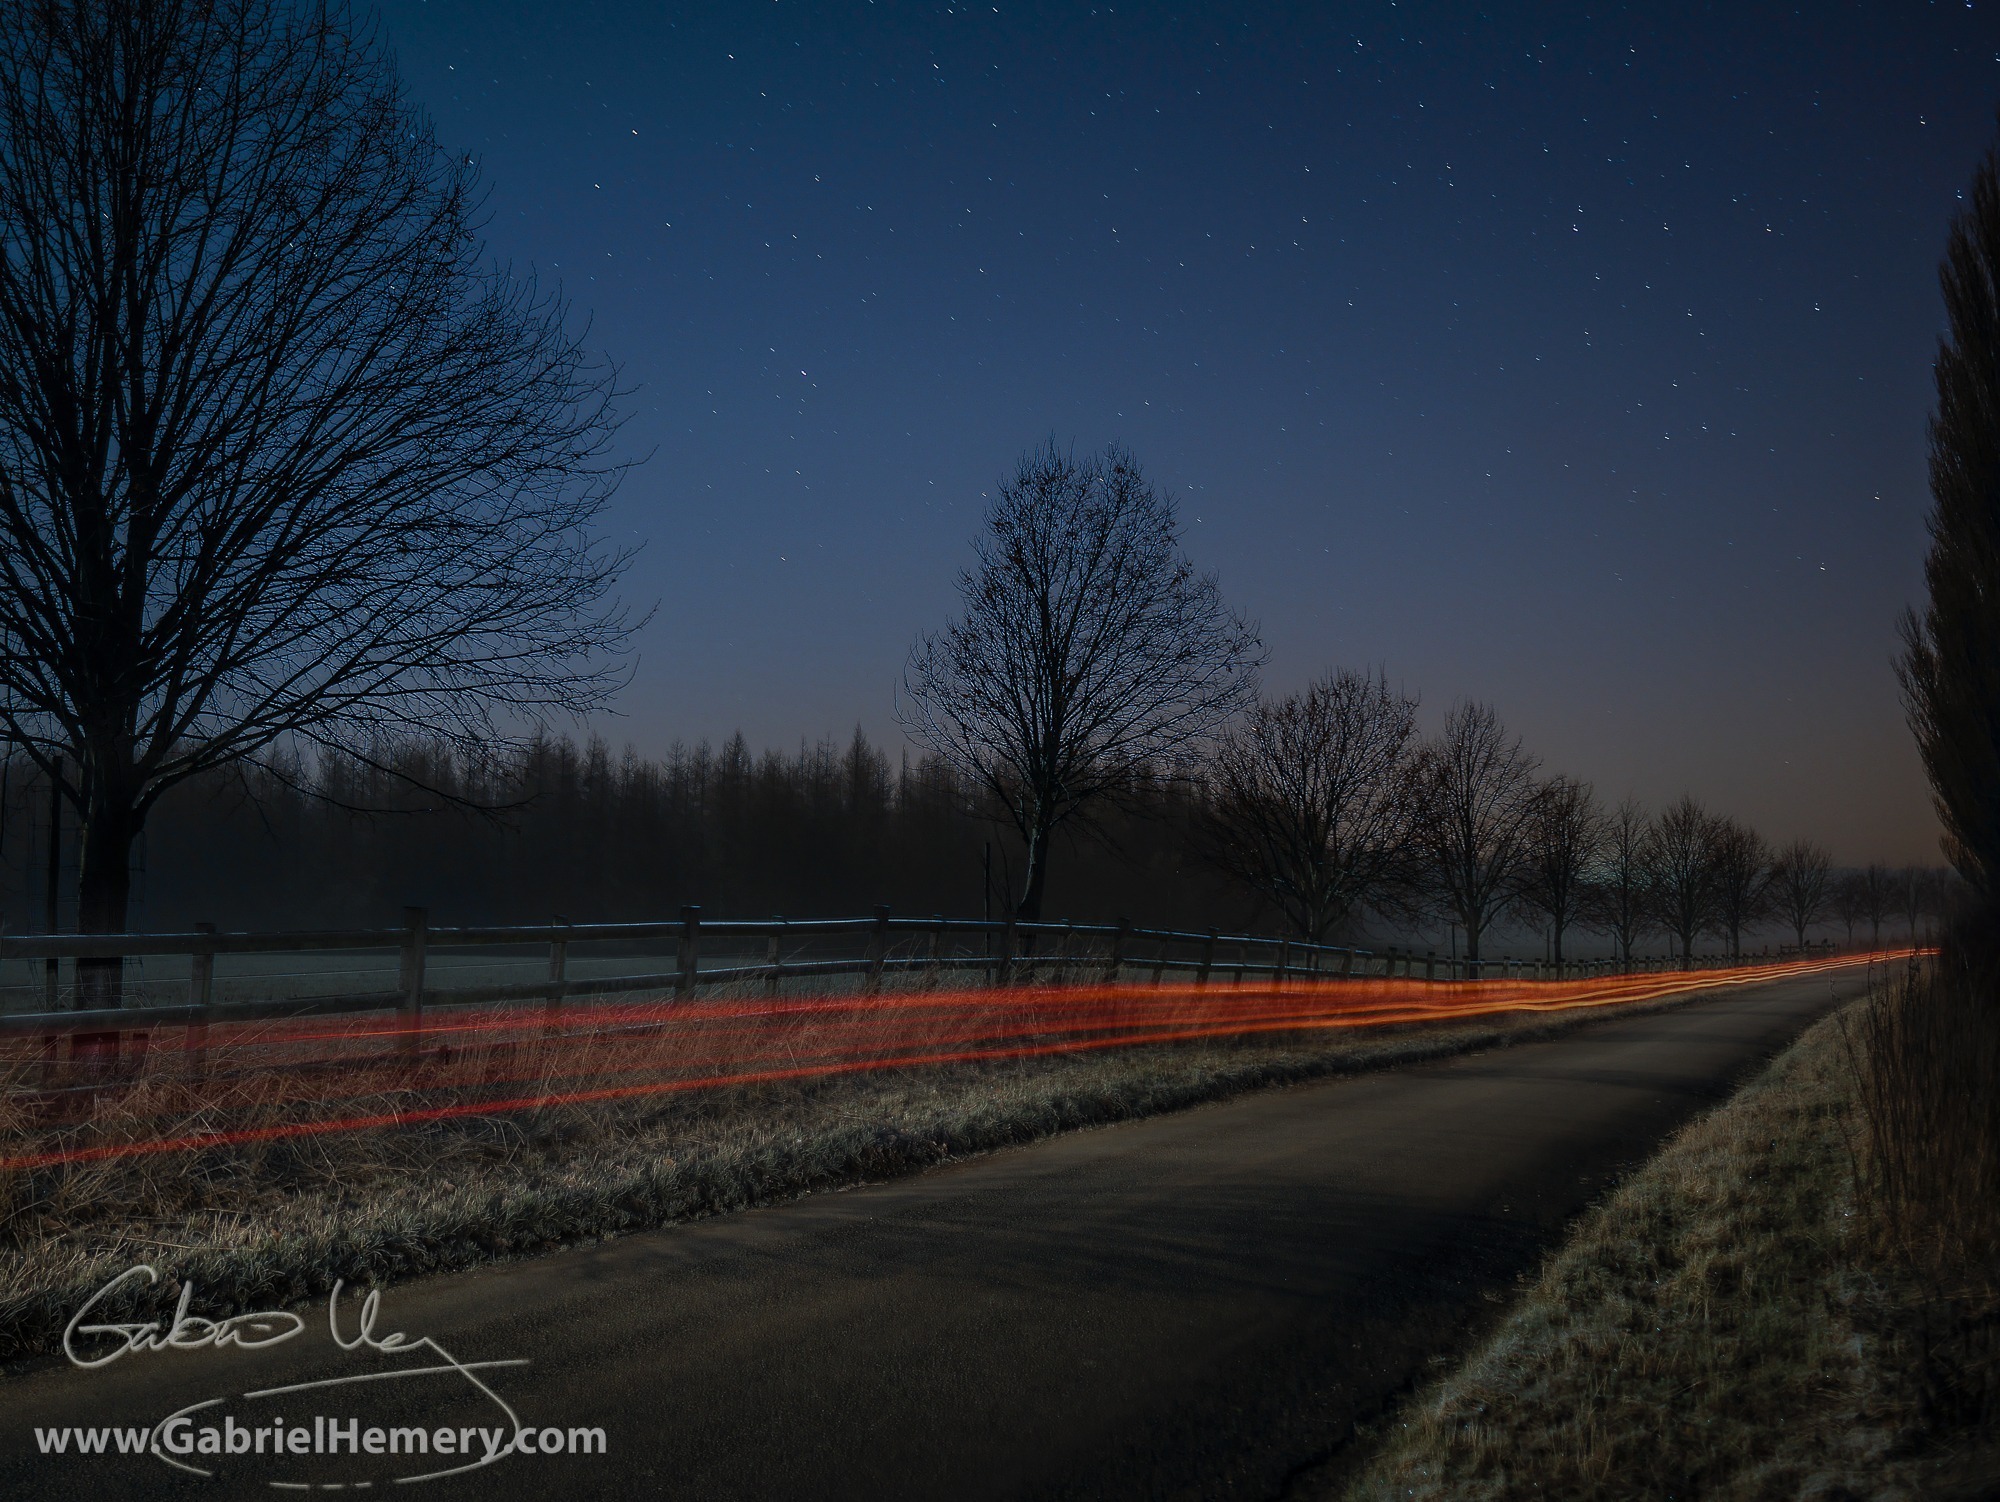 Driving to a night photography shoot - self portrait. Tree avenue and moon shadows.